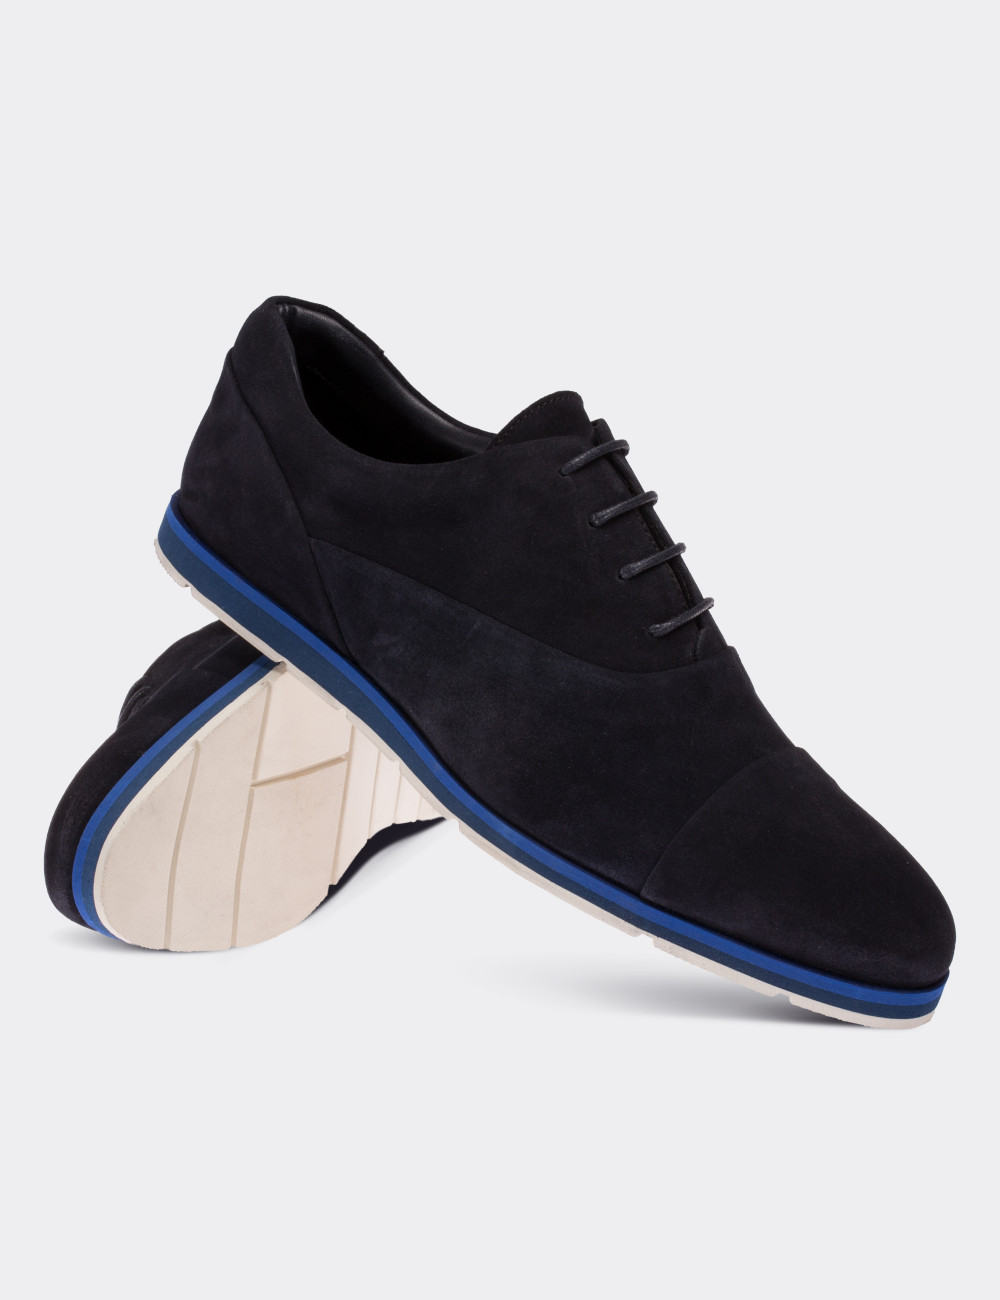 Navy Suede Leather Lace-up Shoes - 01519MLCVE03